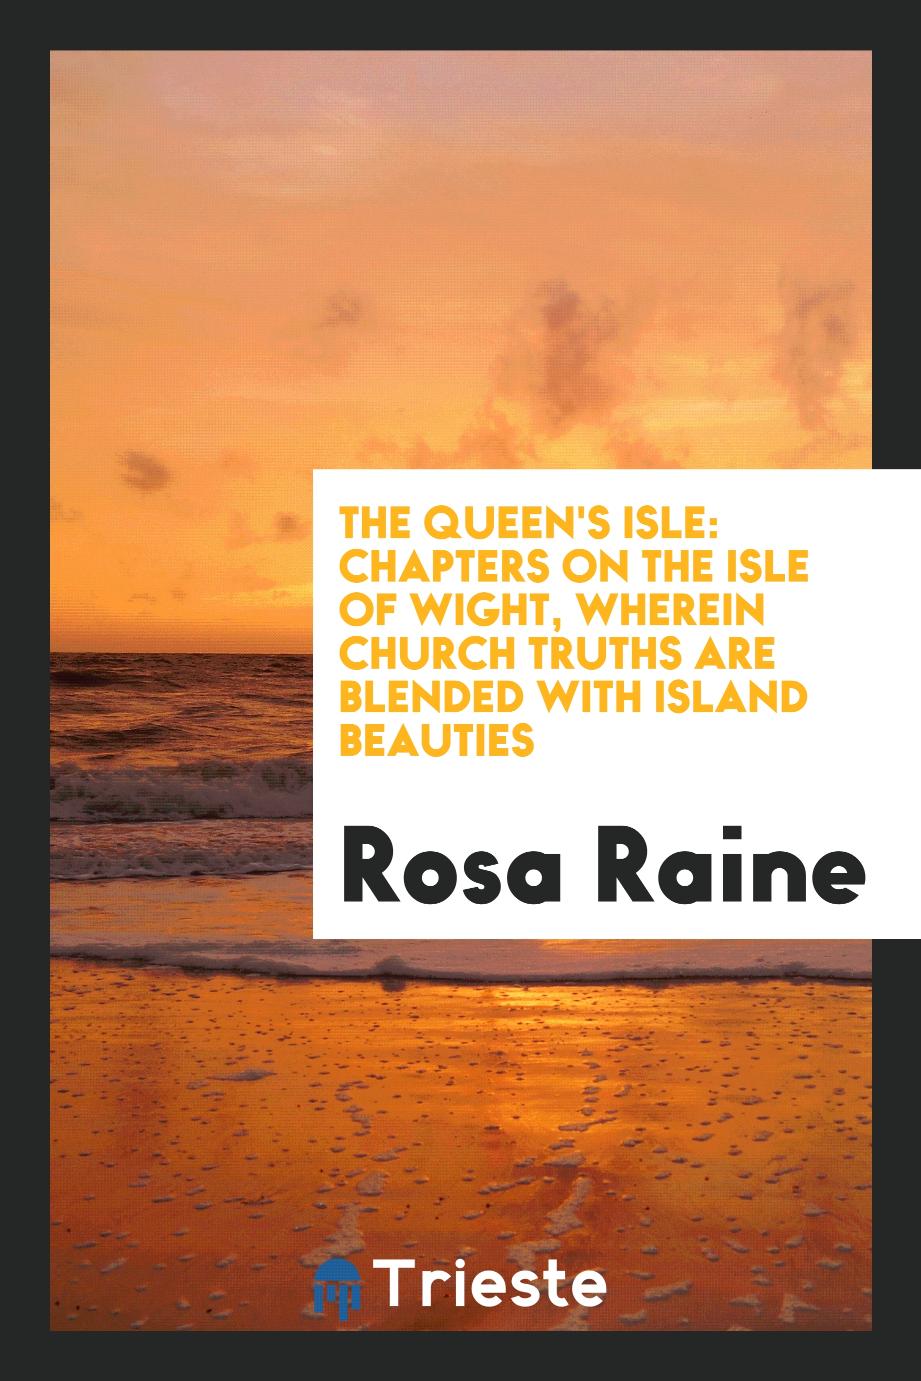 The Queen's Isle: Chapters on the Isle of Wight, Wherein Church Truths Are Blended with Island Beauties